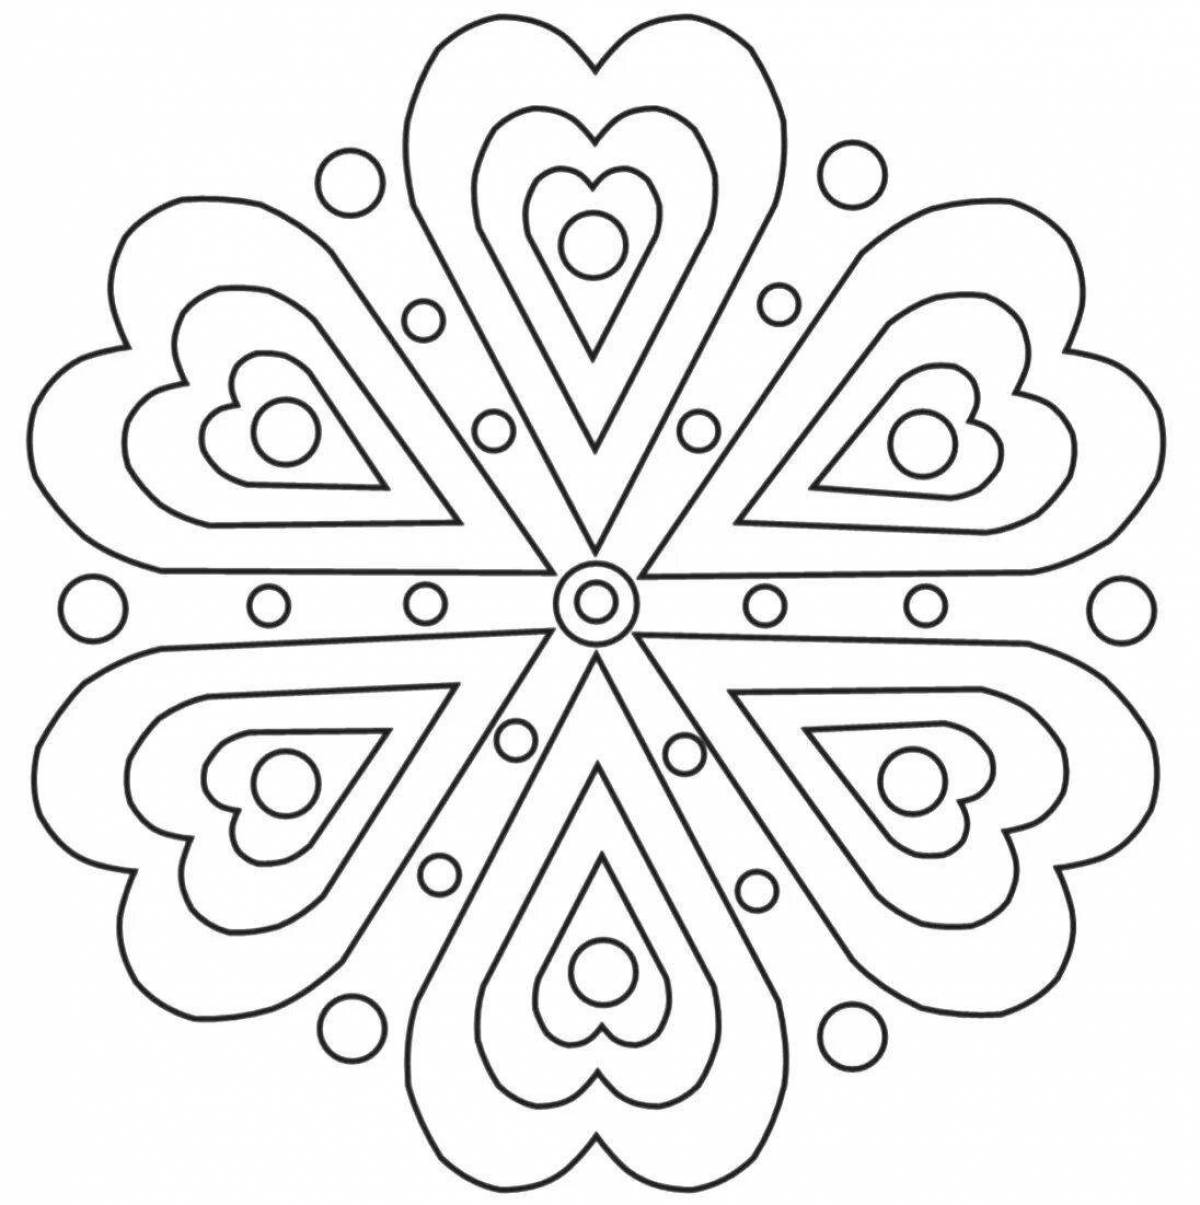 Intimate coloring pages and ornaments